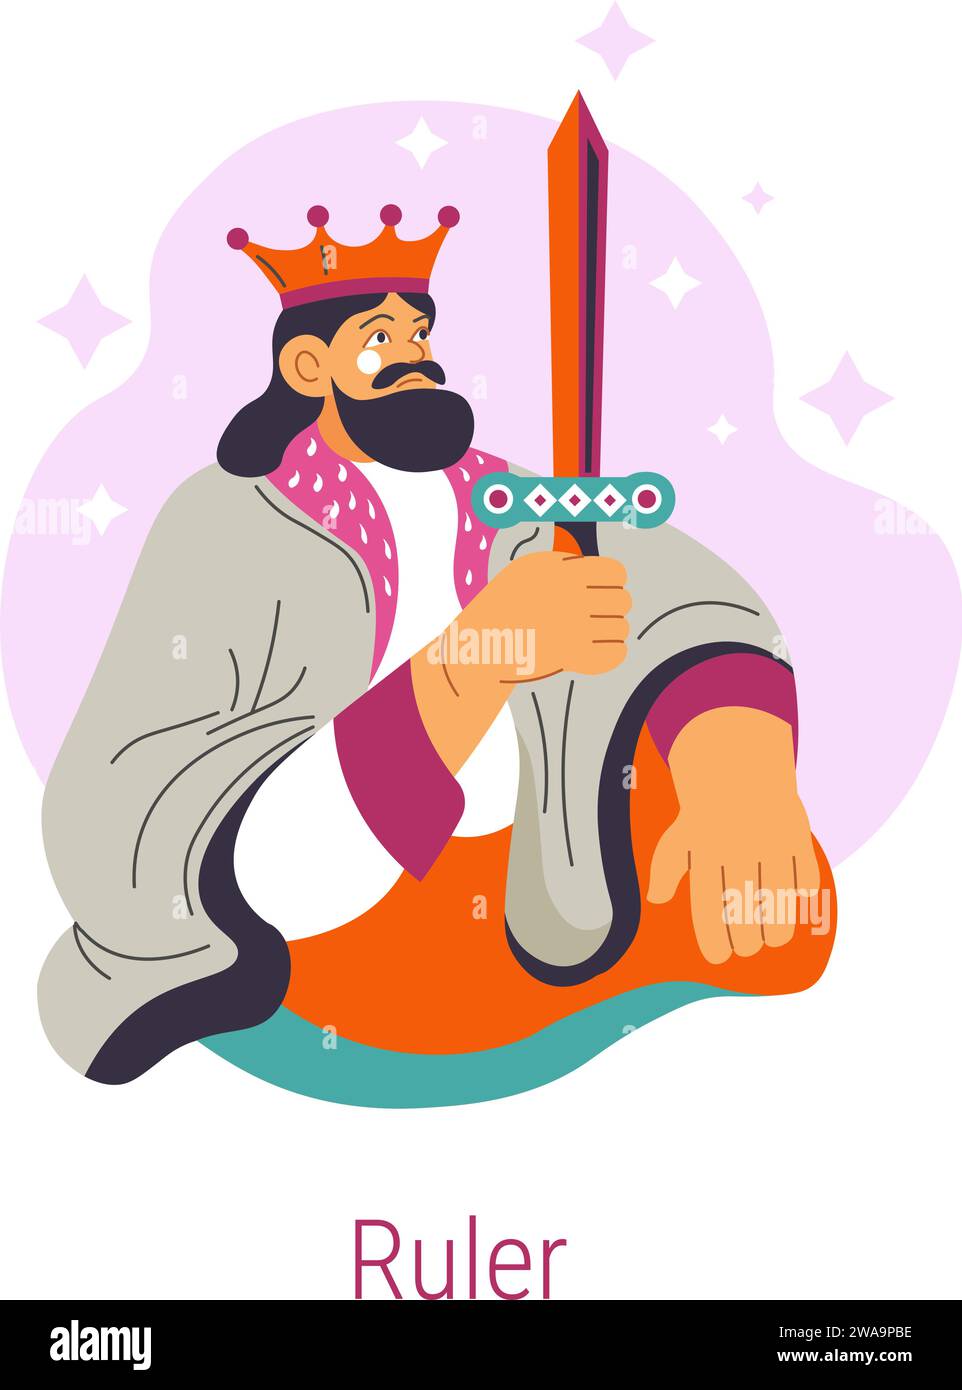 Jungian archetype of Ruler, king wearing crown Stock Vector